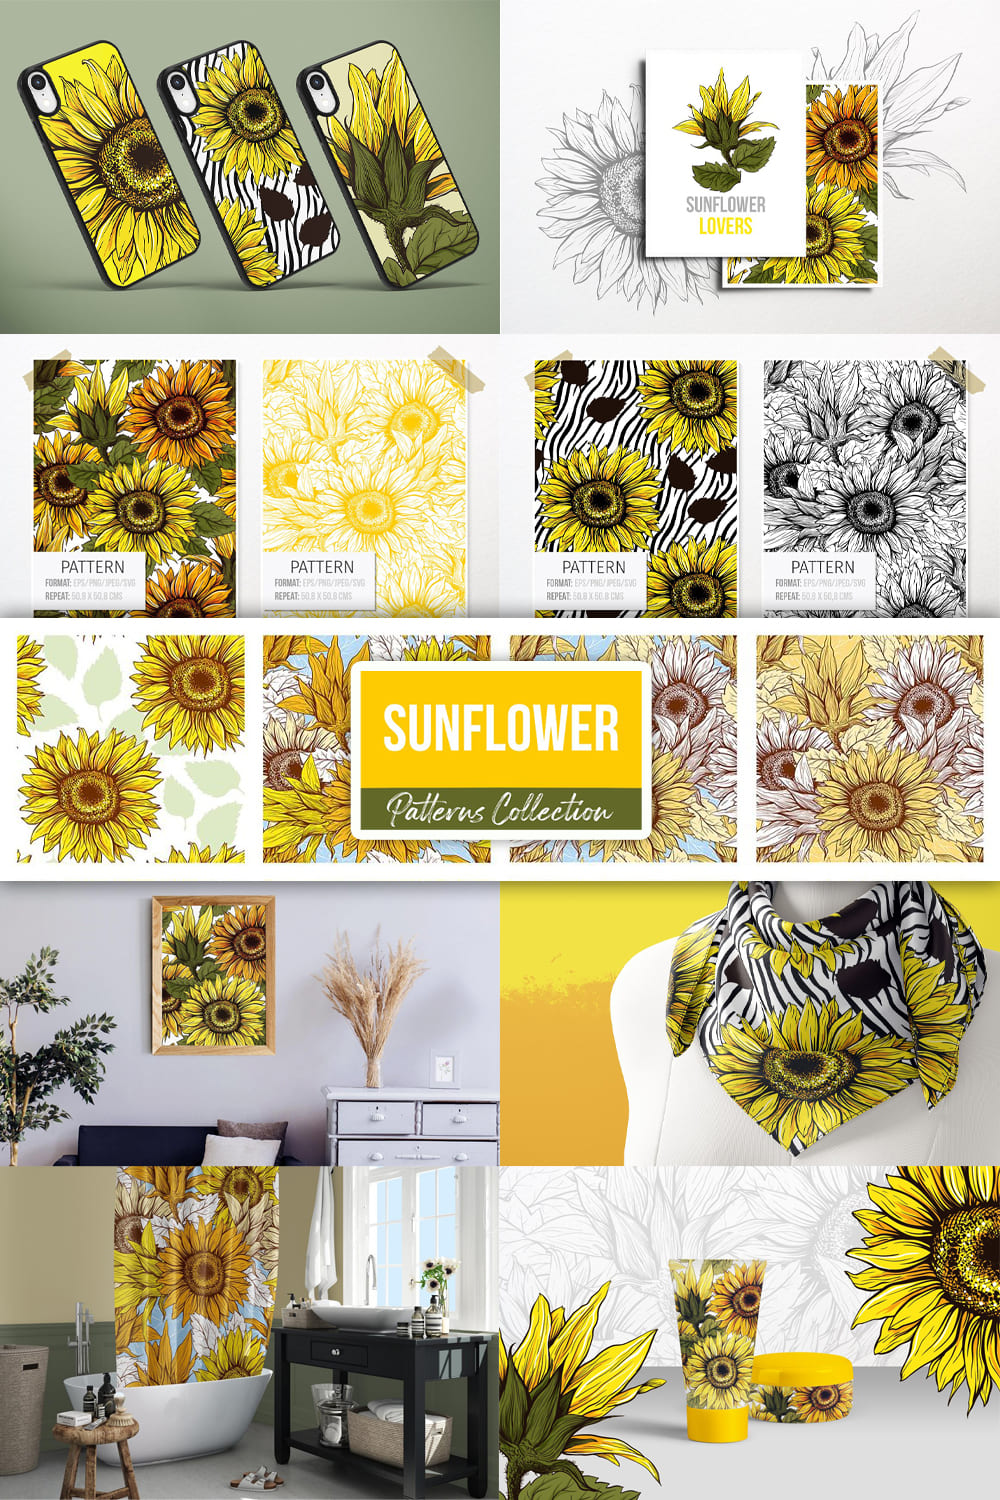 Sunflower patterns collection - pinterest image preview.